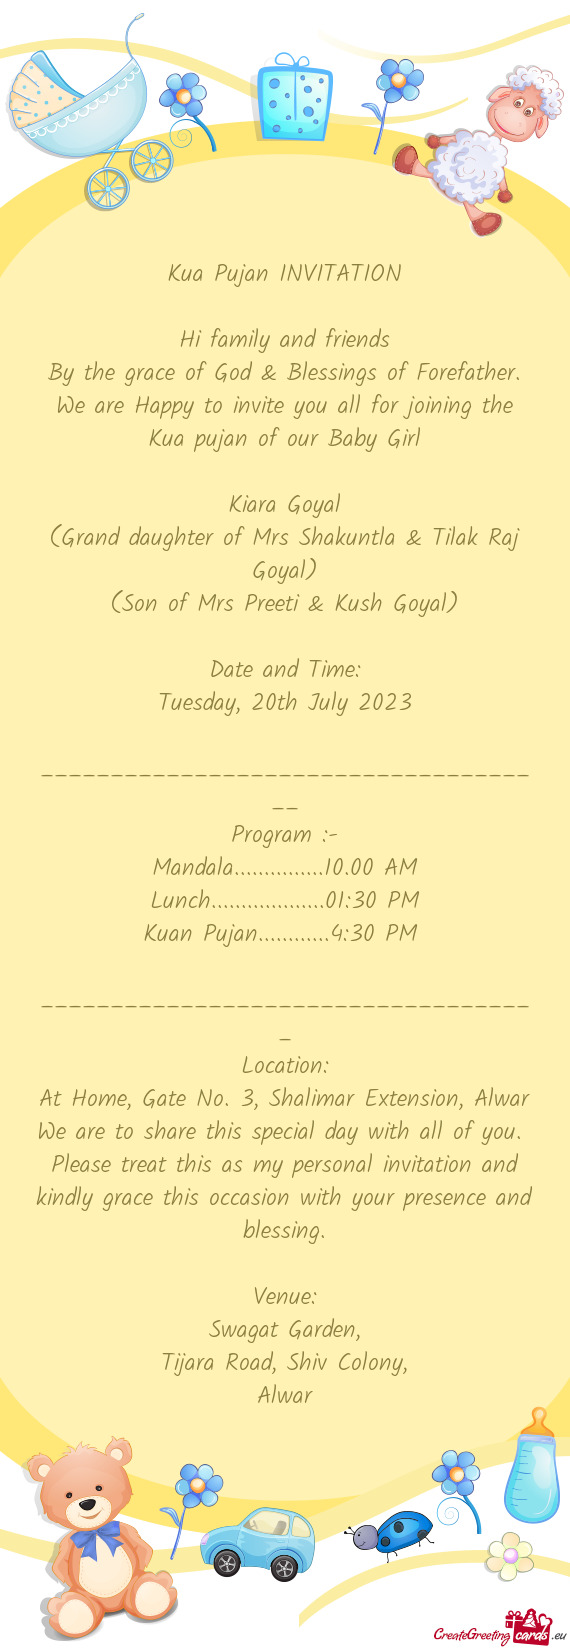 We are Happy to invite you all for joining the Kua pujan of our Baby Girl